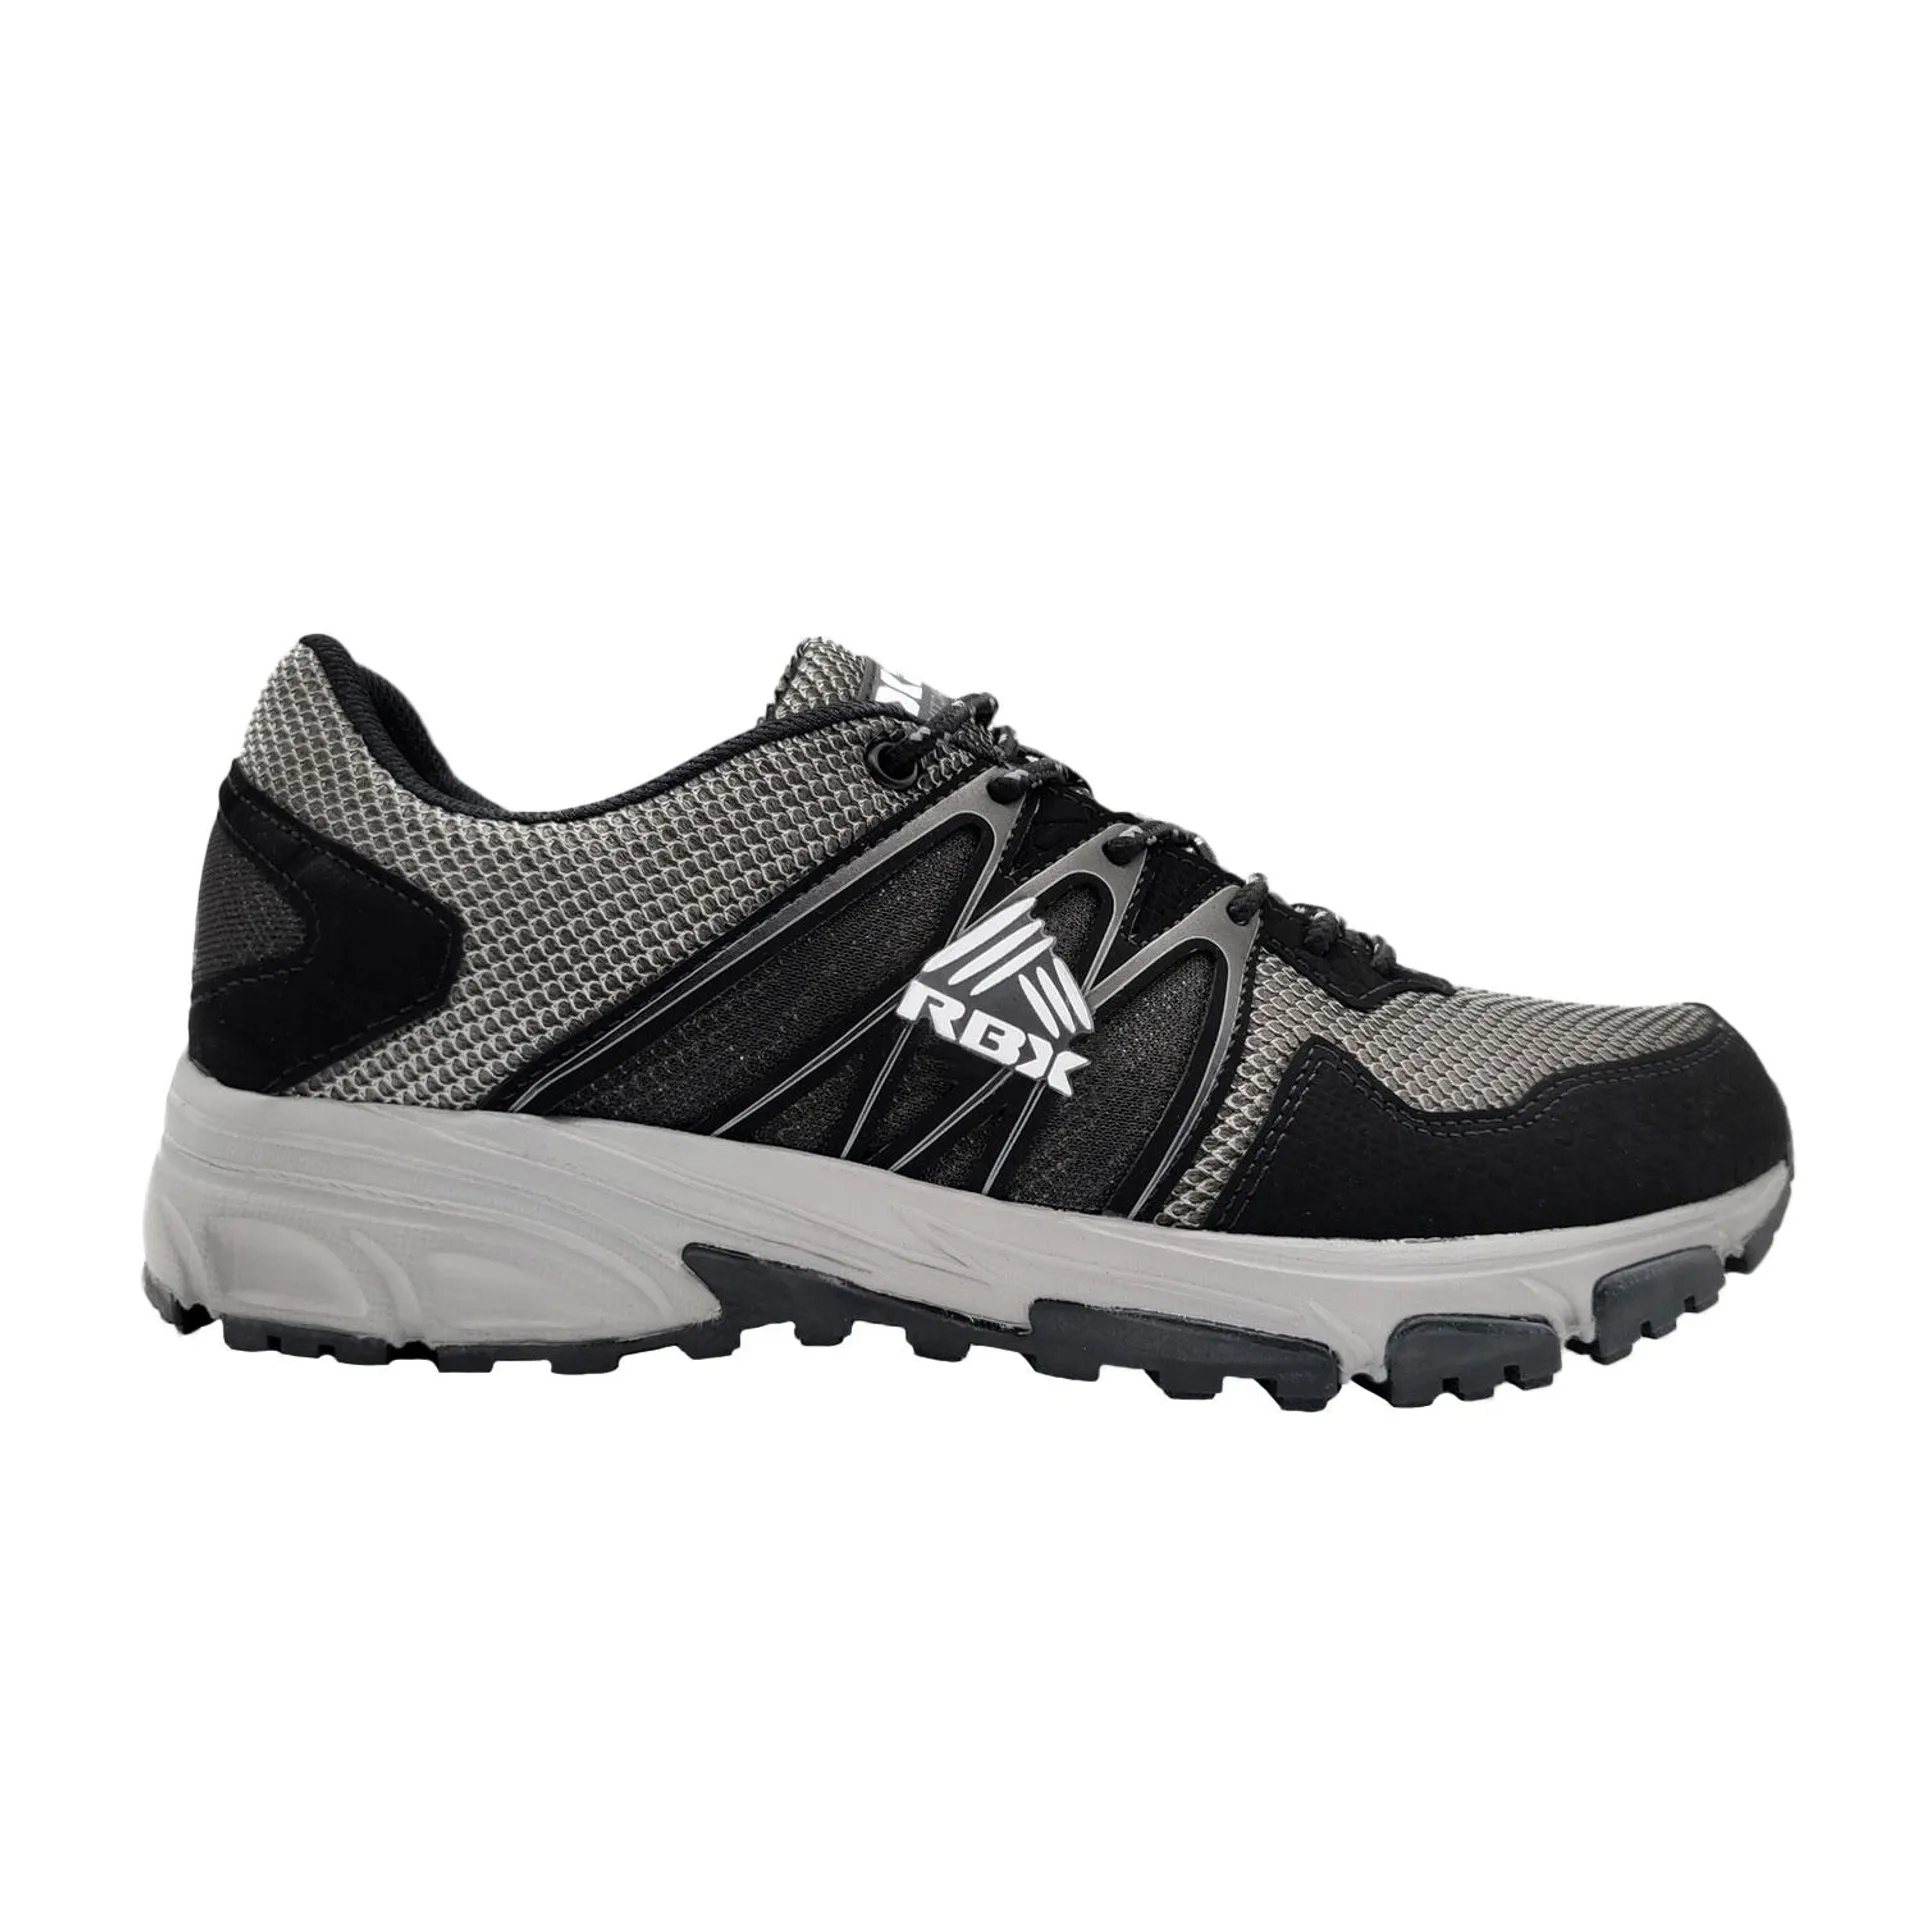 RBX Spruce Men's Wide Trail Running Shoes